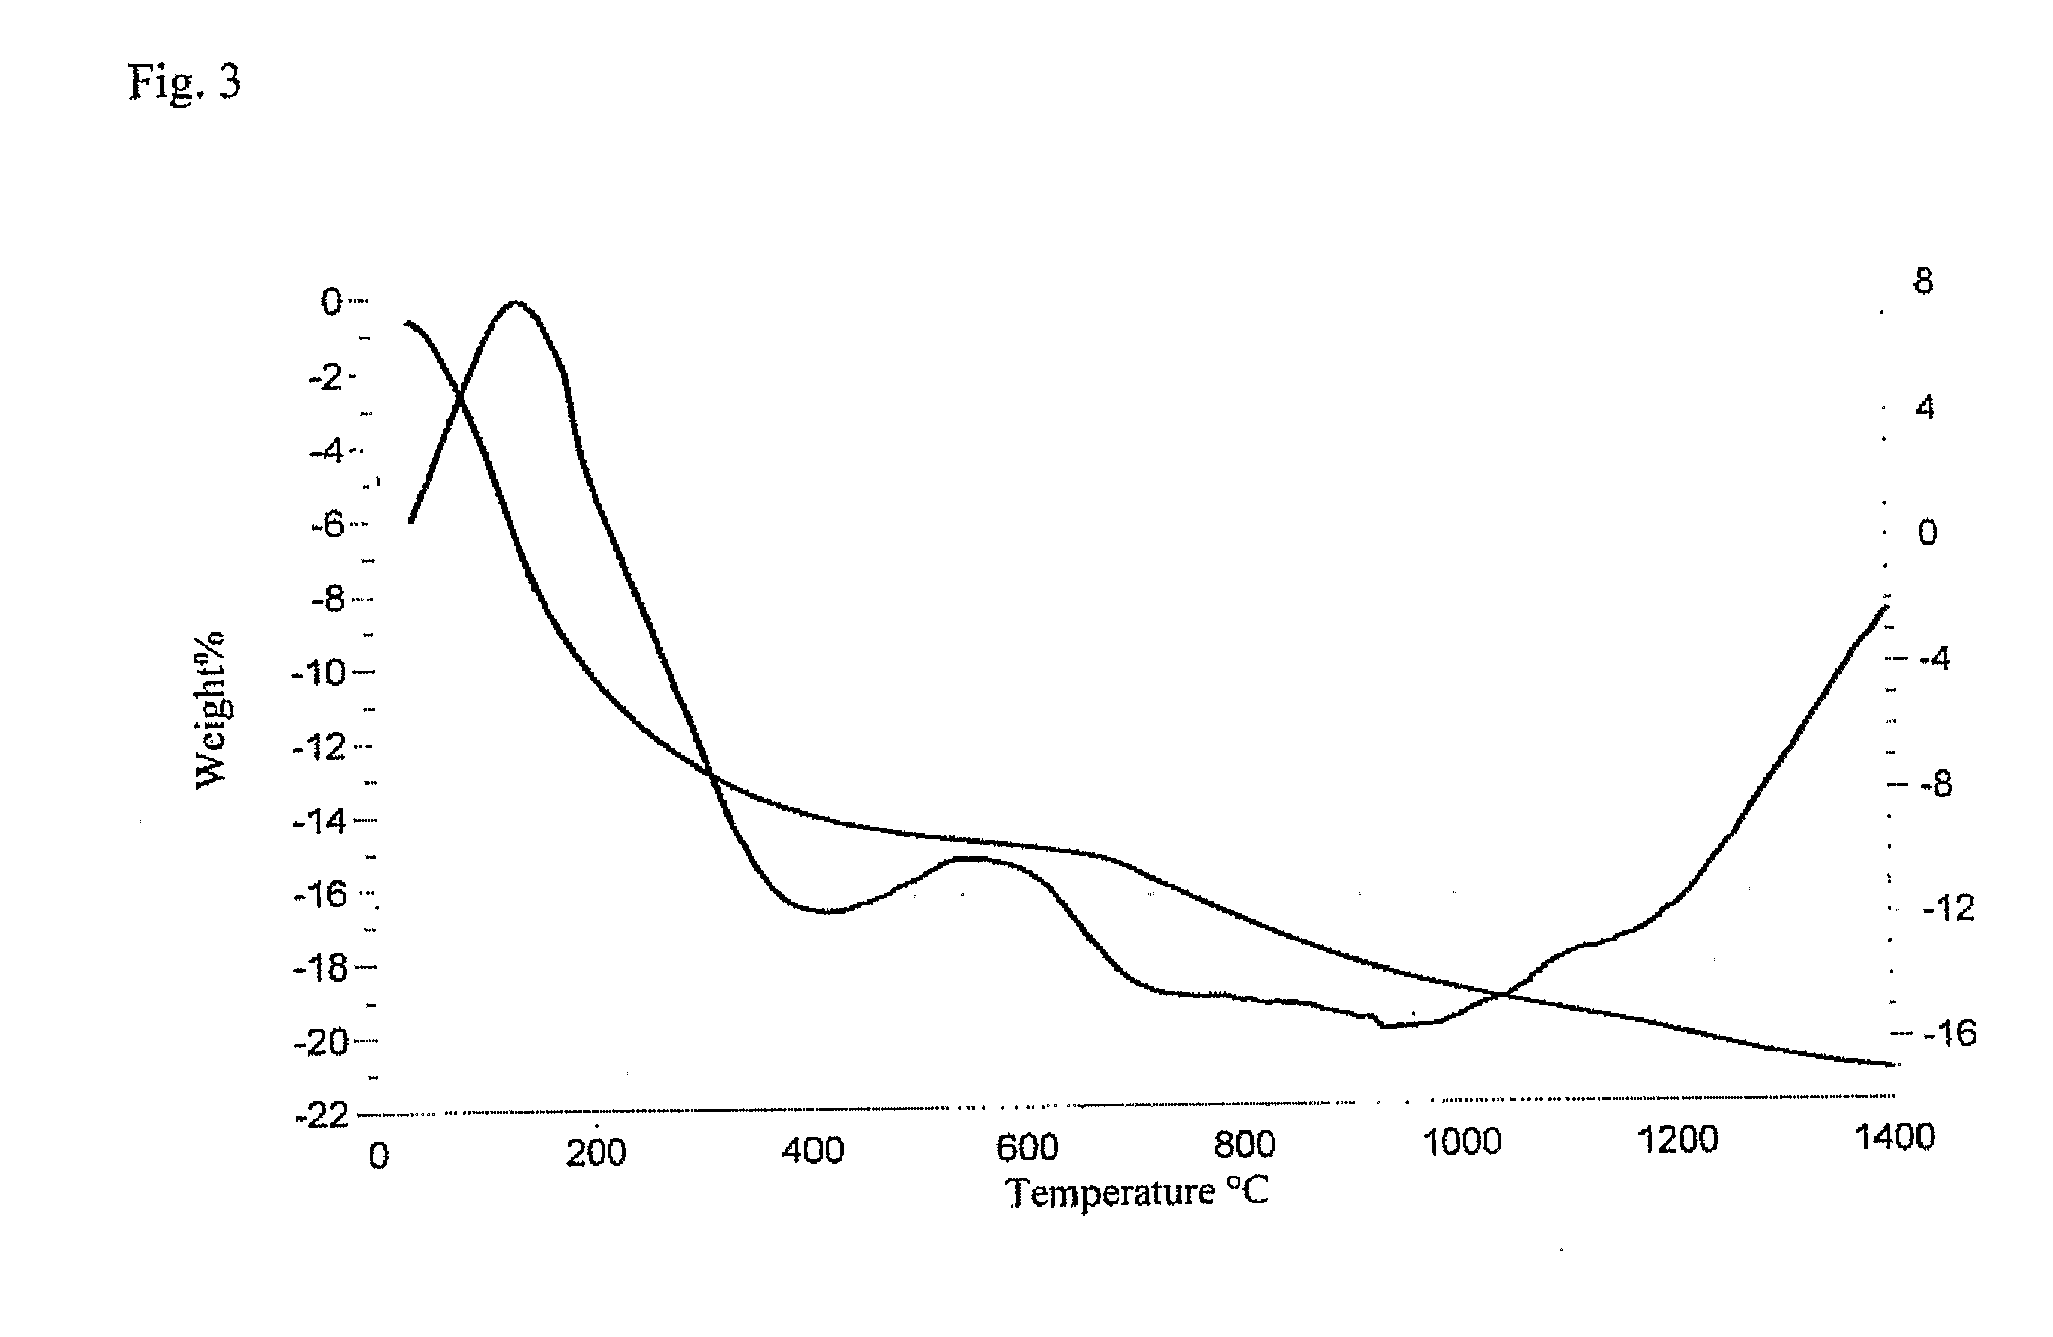 Biometic compounds containing hydroxyapatites substituted with magnesium and carbonate, and the processes used to obtain them